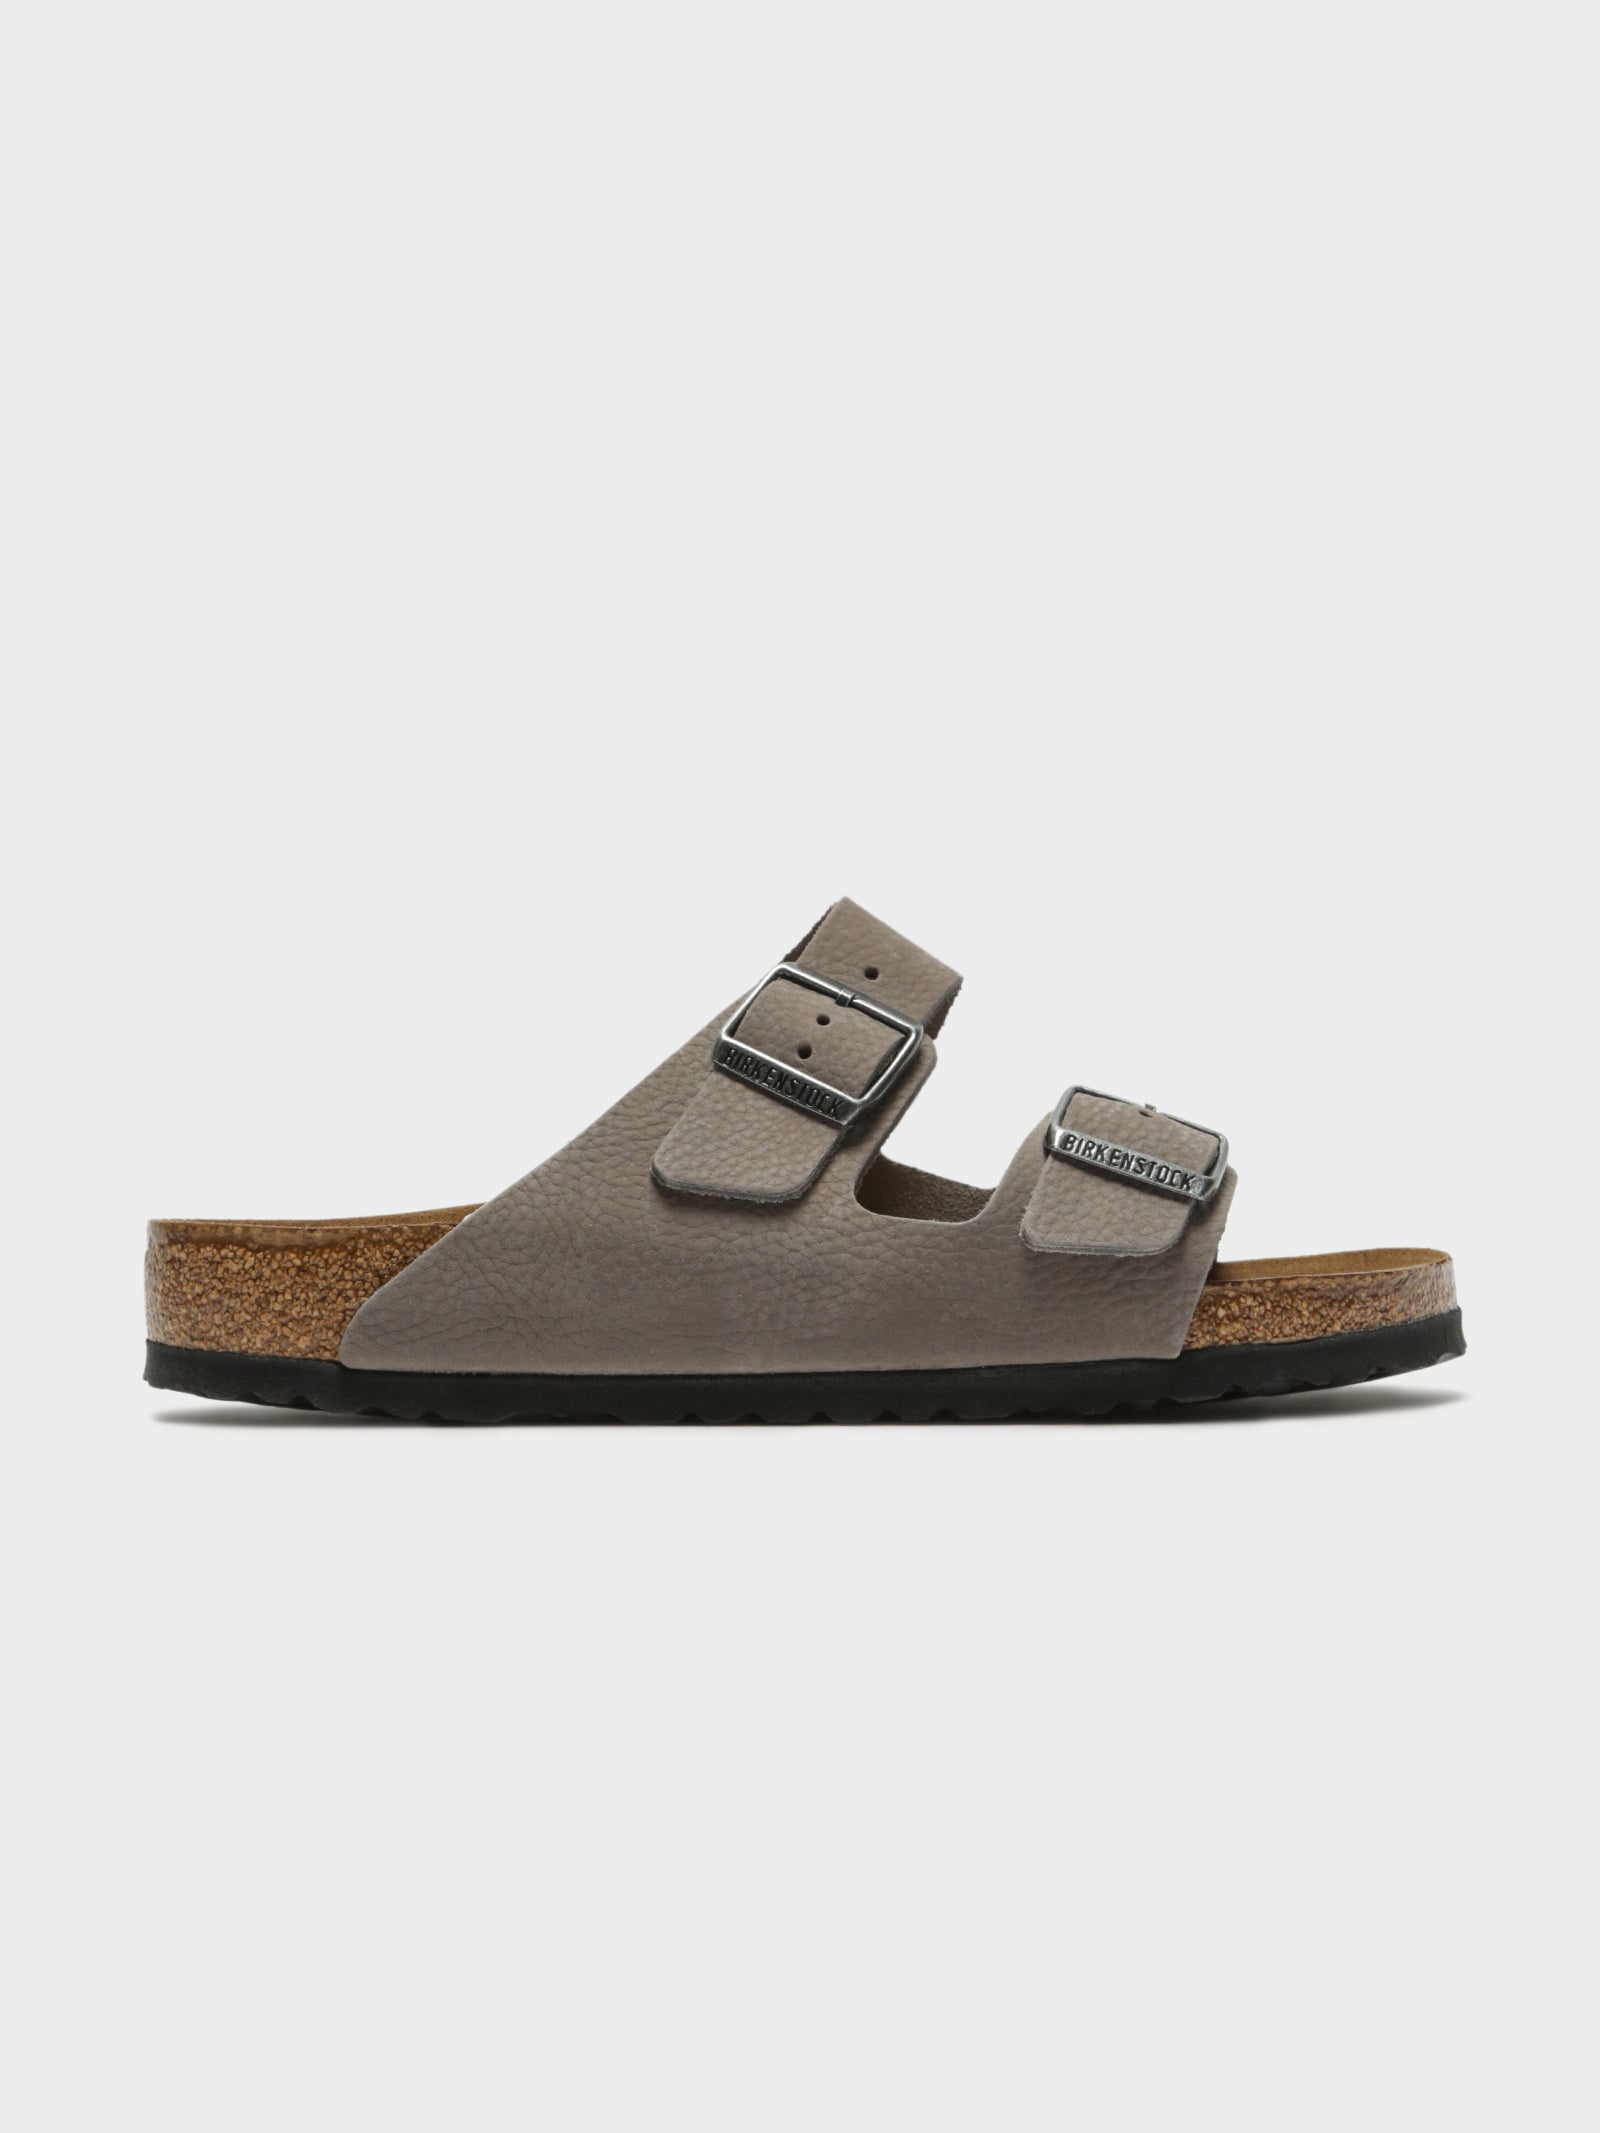 birkenstocks with afterpay